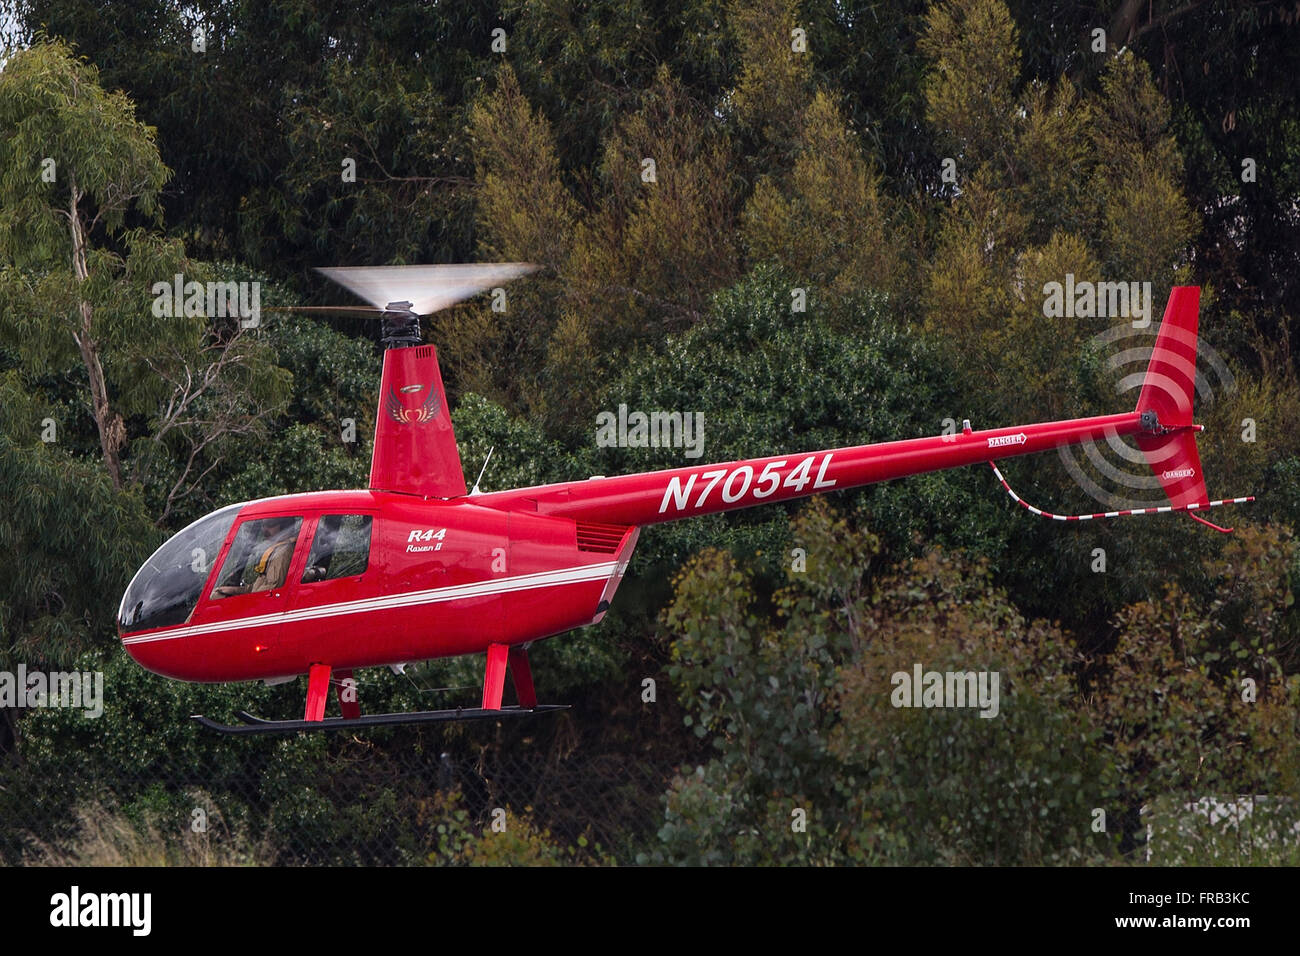 Robinson R44 Raven II (registration N7054L) helicopter flying over Palo Alto Airport (KPAO), Palo Alto, California, United States of America Stock Photo